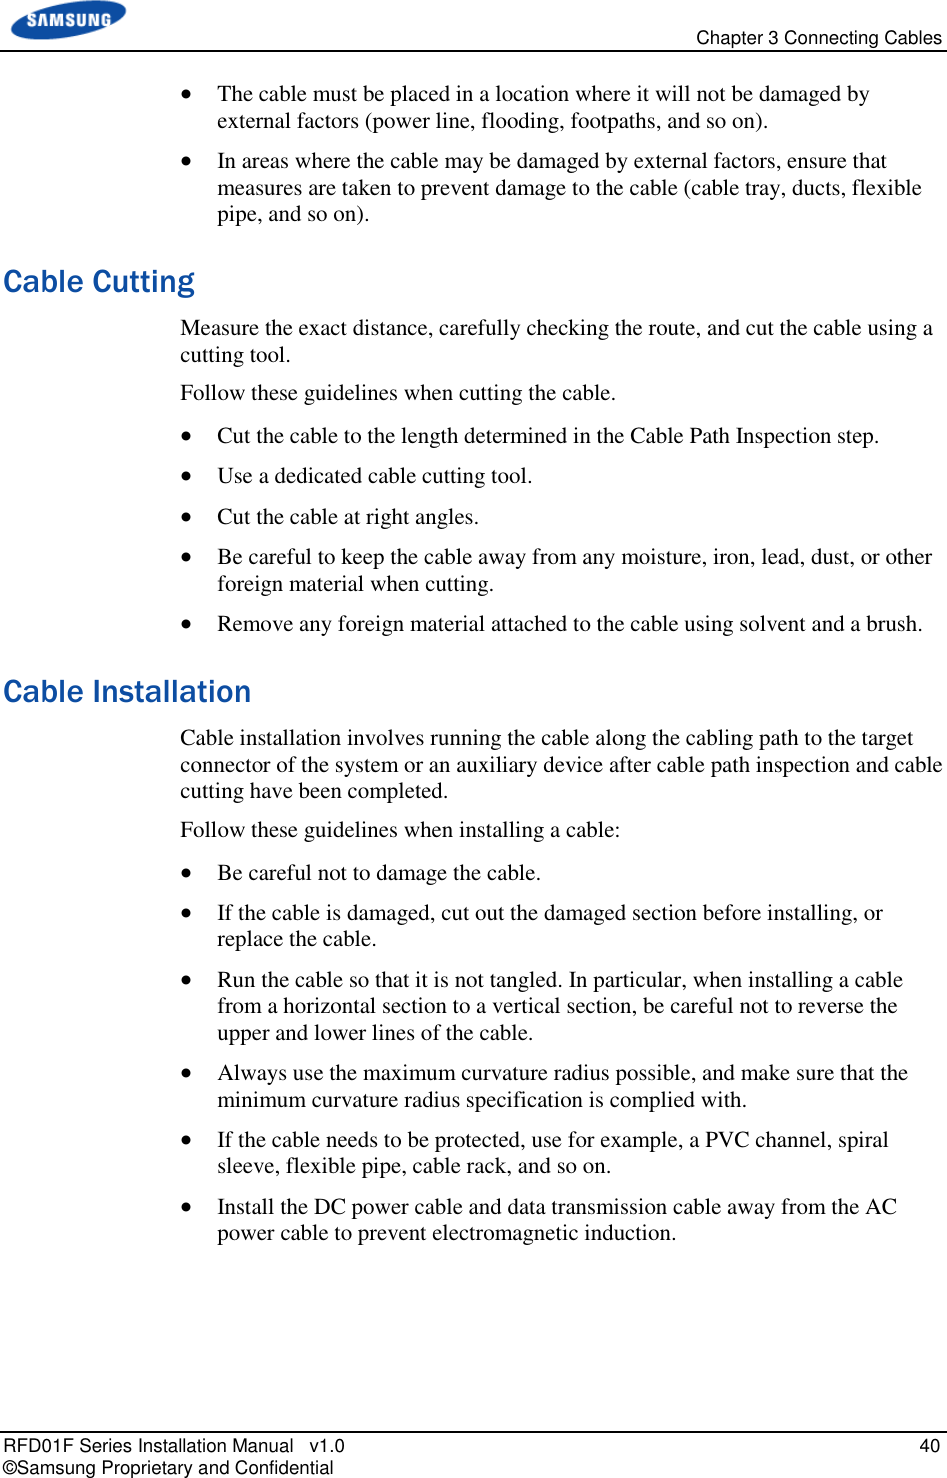   Chapter 3 Connecting Cables RFD01F Series Installation Manual   v1.0   40 © Samsung Proprietary and Confidential  The cable must be placed in a location where it will not be damaged by external factors (power line, flooding, footpaths, and so on).  In areas where the cable may be damaged by external factors, ensure that measures are taken to prevent damage to the cable (cable tray, ducts, flexible pipe, and so on). Cable Cutting Measure the exact distance, carefully checking the route, and cut the cable using a cutting tool. Follow these guidelines when cutting the cable.  Cut the cable to the length determined in the Cable Path Inspection step.  Use a dedicated cable cutting tool.  Cut the cable at right angles.  Be careful to keep the cable away from any moisture, iron, lead, dust, or other foreign material when cutting.   Remove any foreign material attached to the cable using solvent and a brush. Cable Installation Cable installation involves running the cable along the cabling path to the target connector of the system or an auxiliary device after cable path inspection and cable cutting have been completed. Follow these guidelines when installing a cable:   Be careful not to damage the cable.  If the cable is damaged, cut out the damaged section before installing, or replace the cable.  Run the cable so that it is not tangled. In particular, when installing a cable from a horizontal section to a vertical section, be careful not to reverse the upper and lower lines of the cable.  Always use the maximum curvature radius possible, and make sure that the minimum curvature radius specification is complied with.  If the cable needs to be protected, use for example, a PVC channel, spiral sleeve, flexible pipe, cable rack, and so on.  Install the DC power cable and data transmission cable away from the AC power cable to prevent electromagnetic induction.   